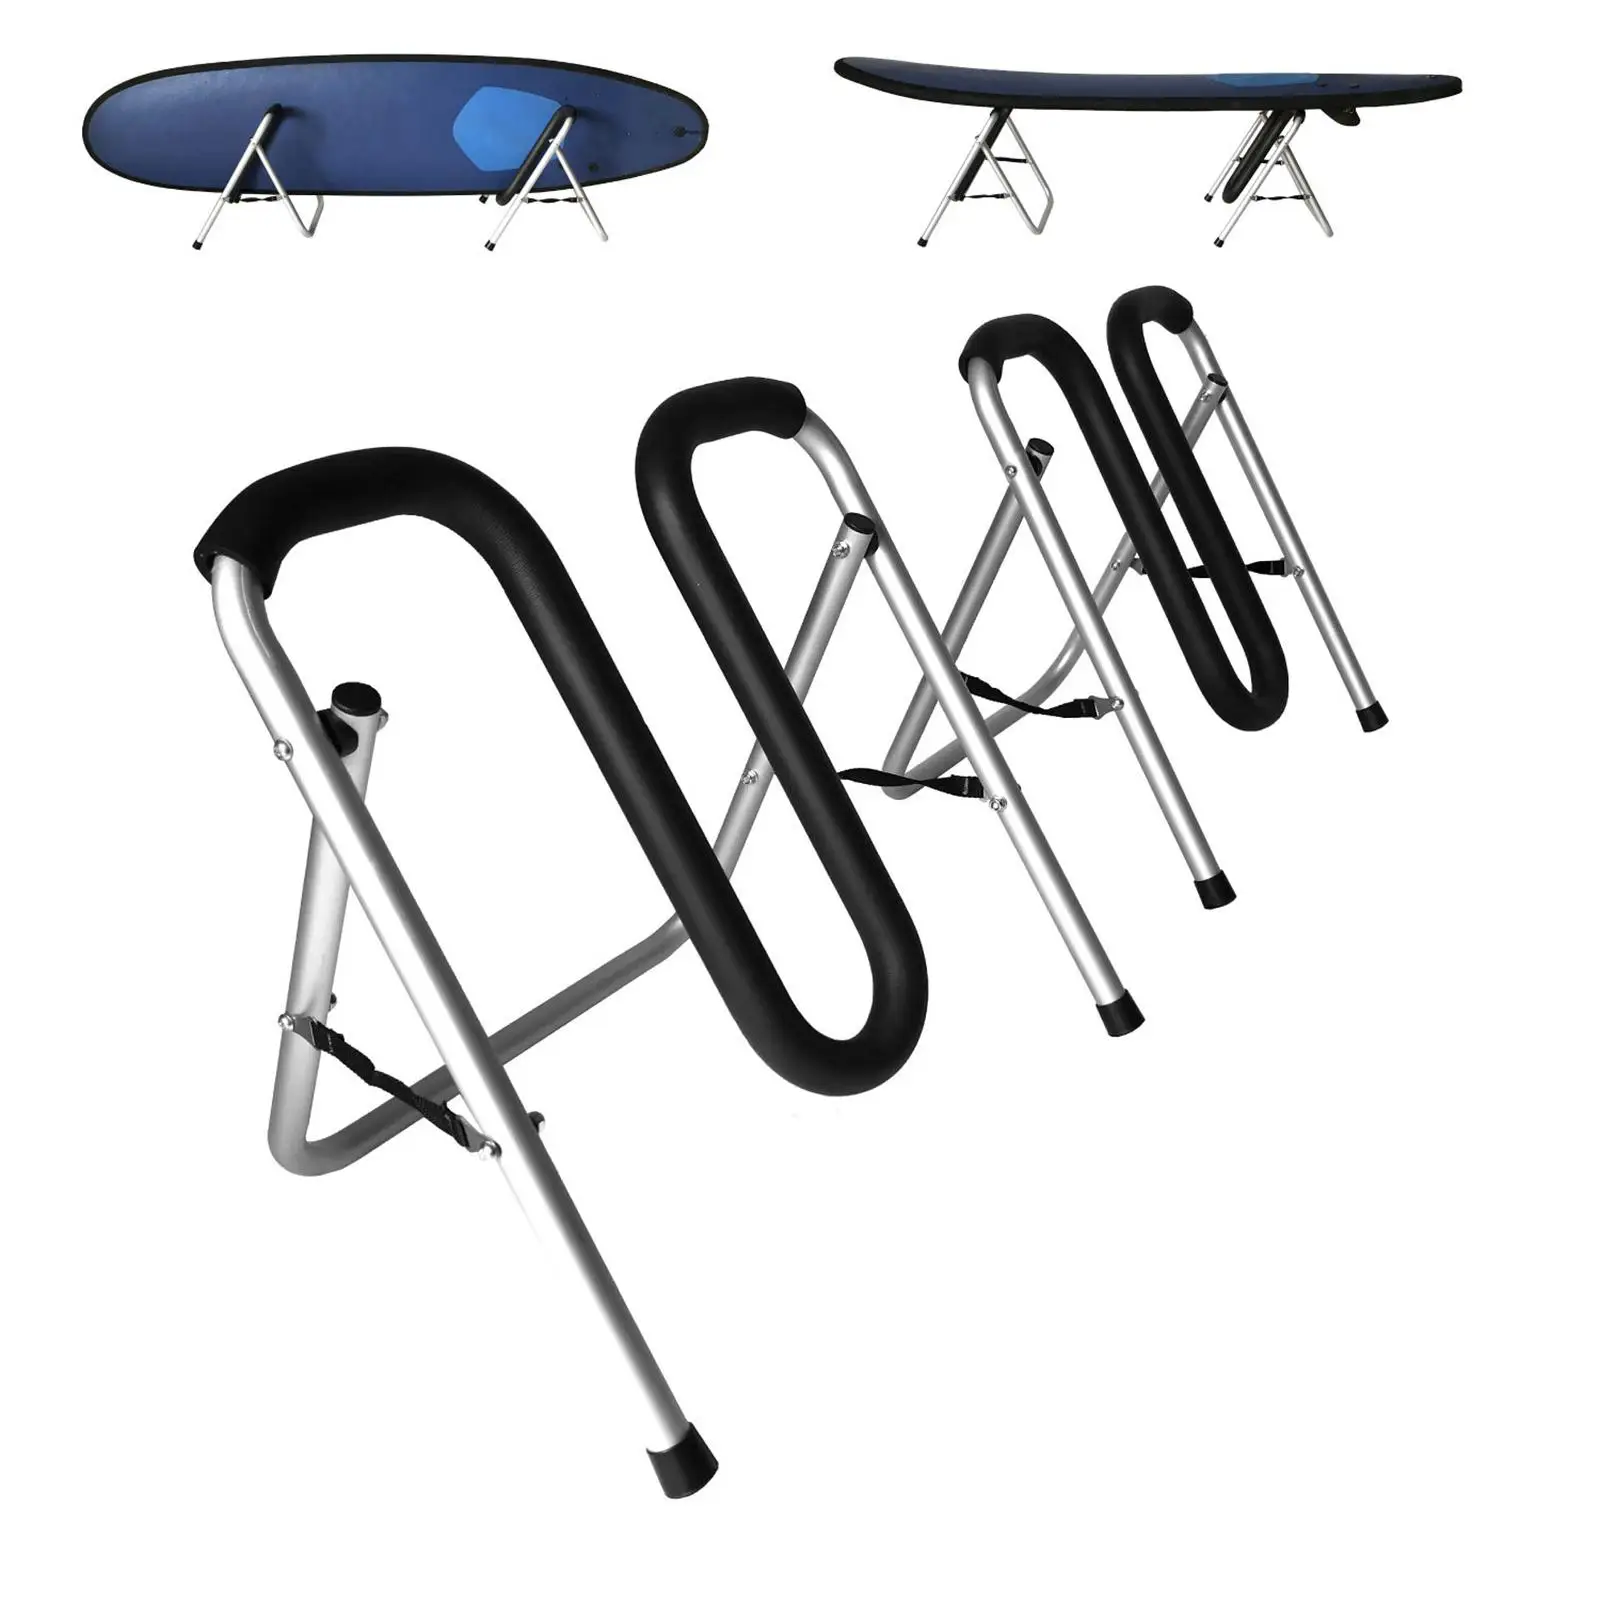 Surfboard Stand Holds Longboards and Shortboards Skateboard Storage Display Stand Surf Board Rack